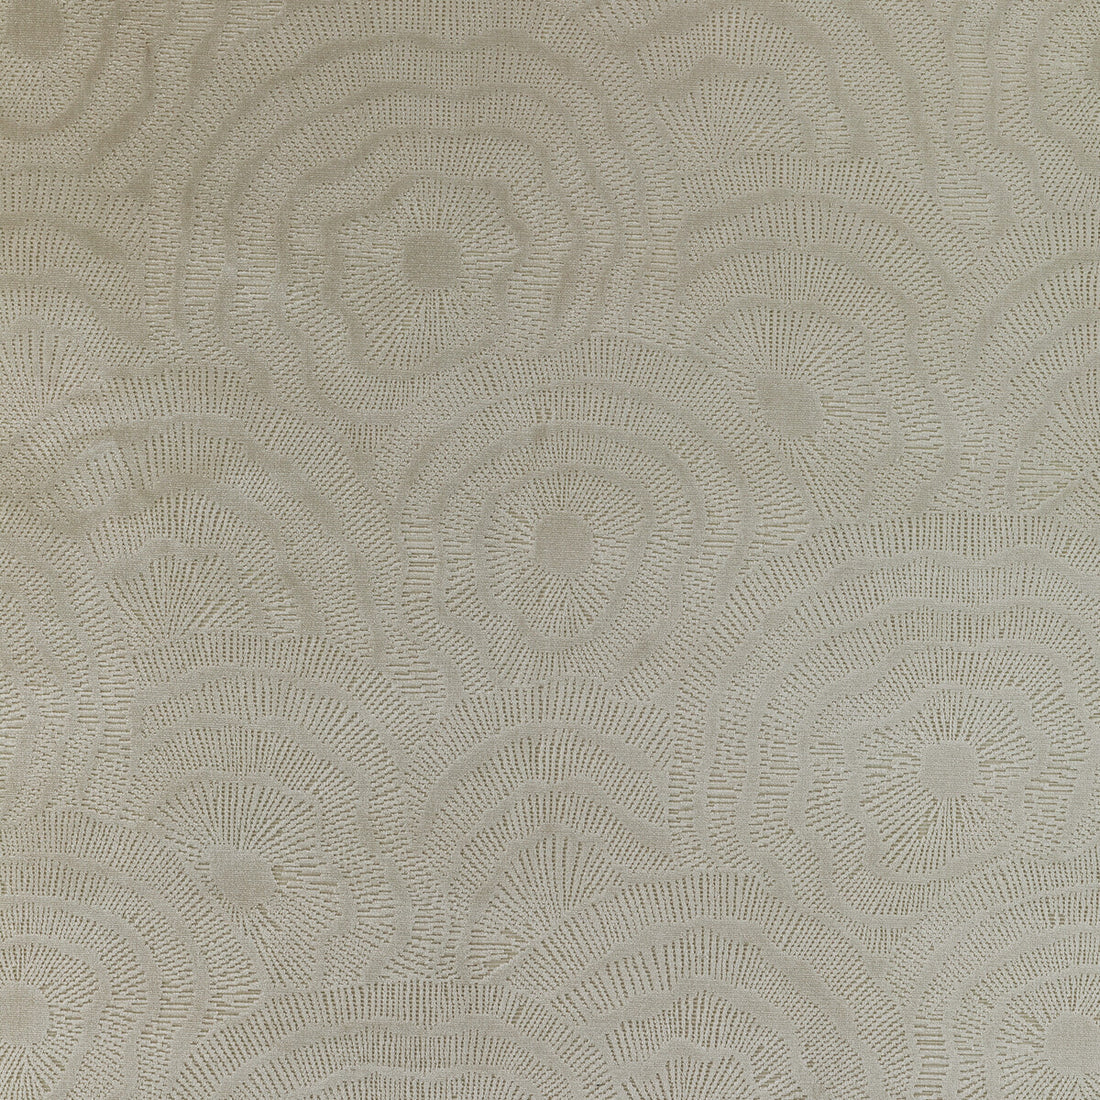 Panache Velvet fabric in sand color - pattern 36366.106.0 - by Kravet Couture in the Corey Damen Jenkins Trad Nouveau collection